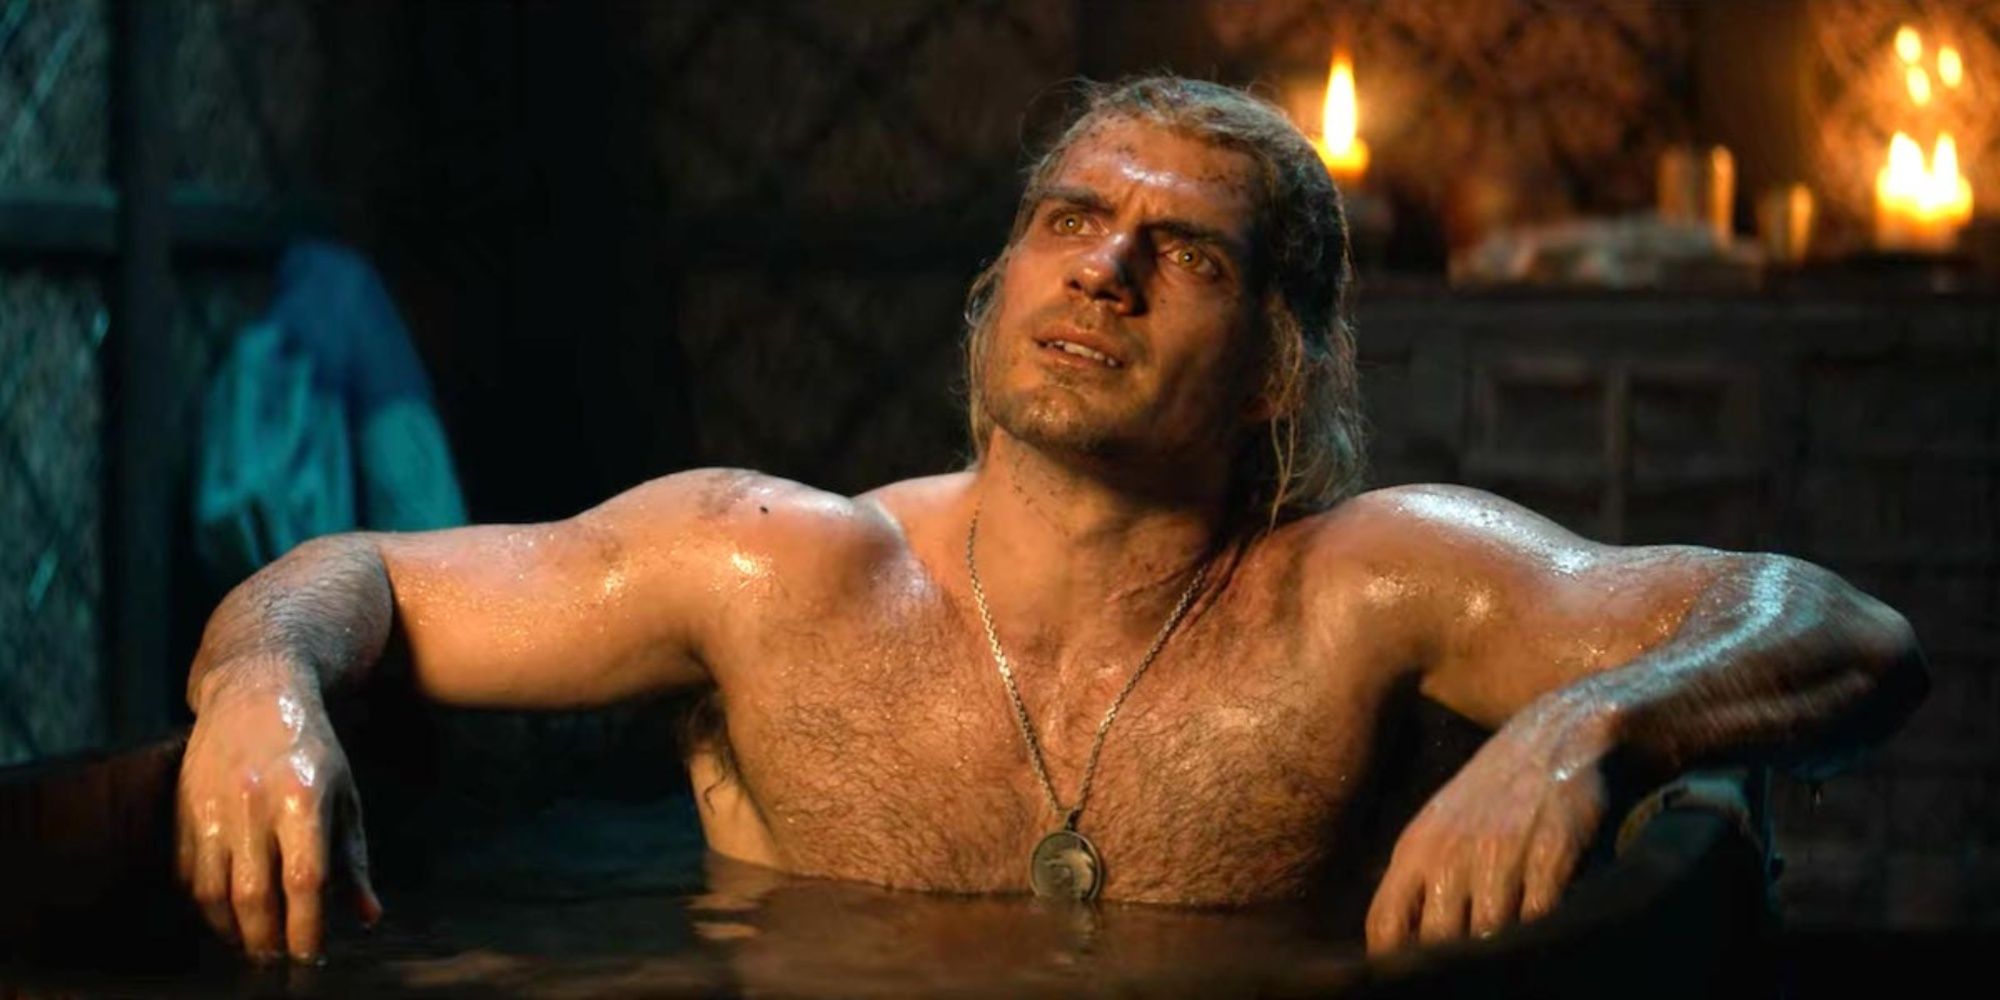 the witcher's geralt in a bathtub